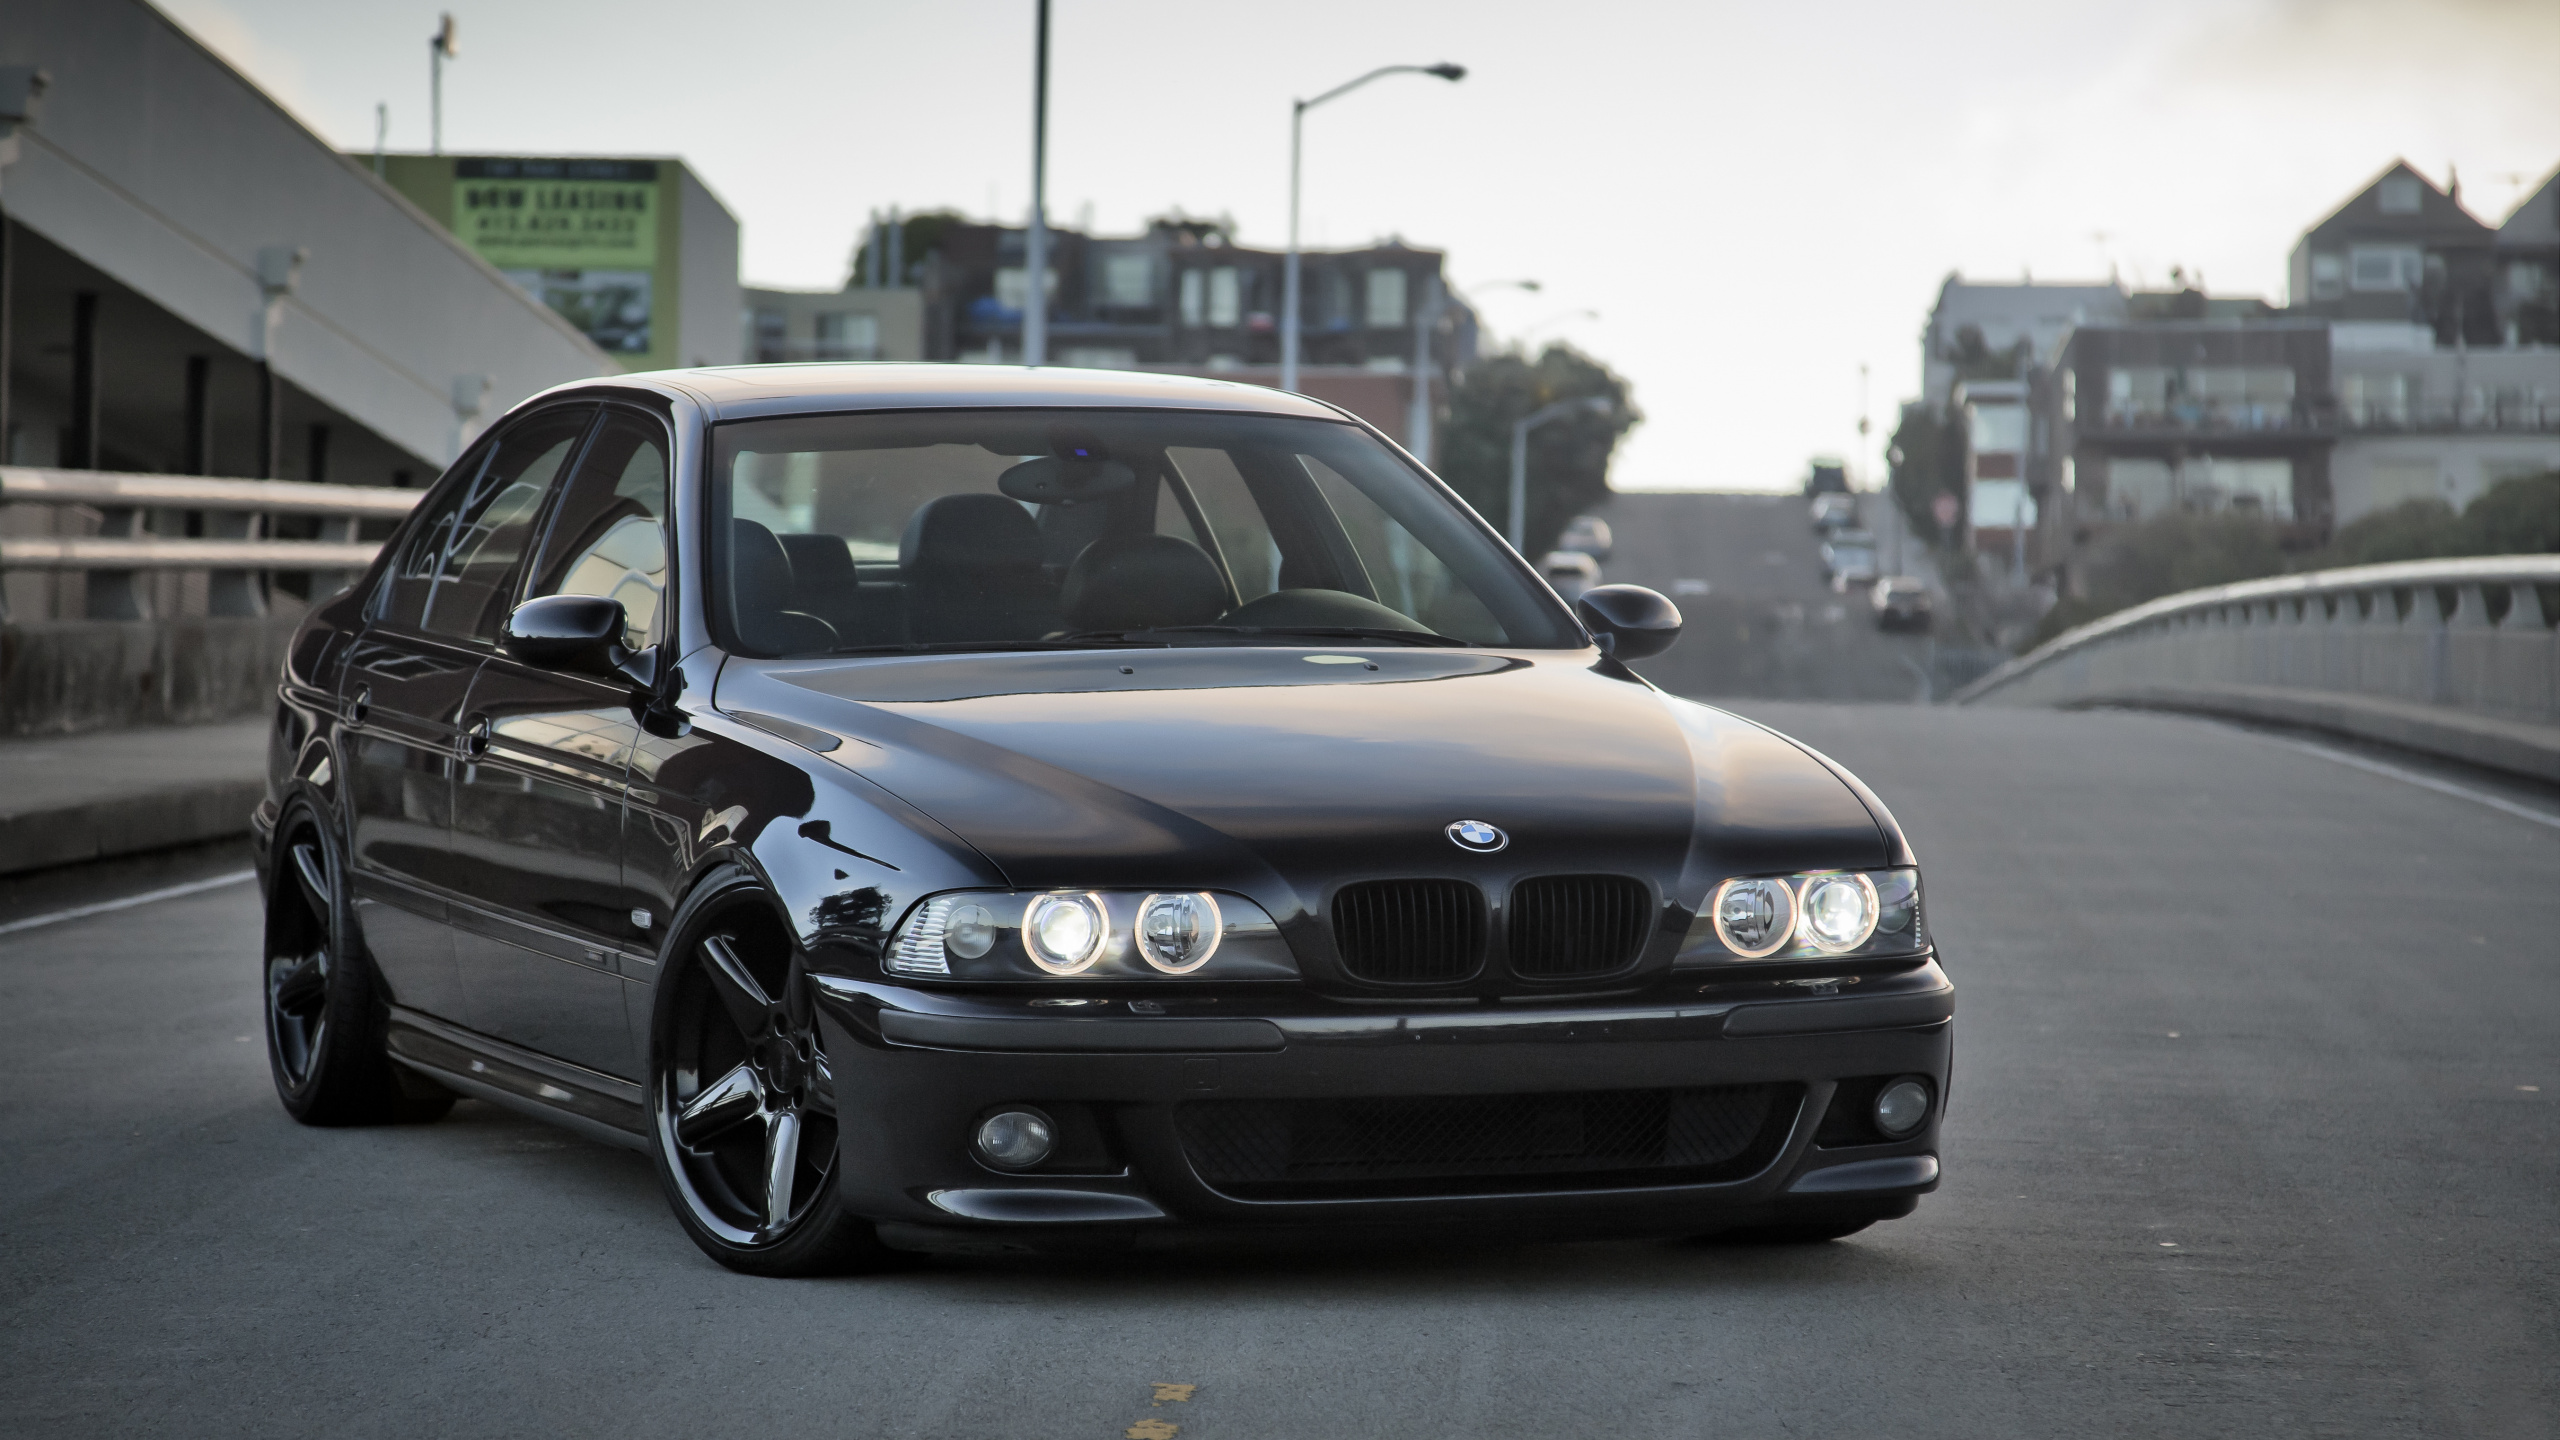 Black Bmw m 3 on Road During Daytime. Wallpaper in 2560x1440 Resolution